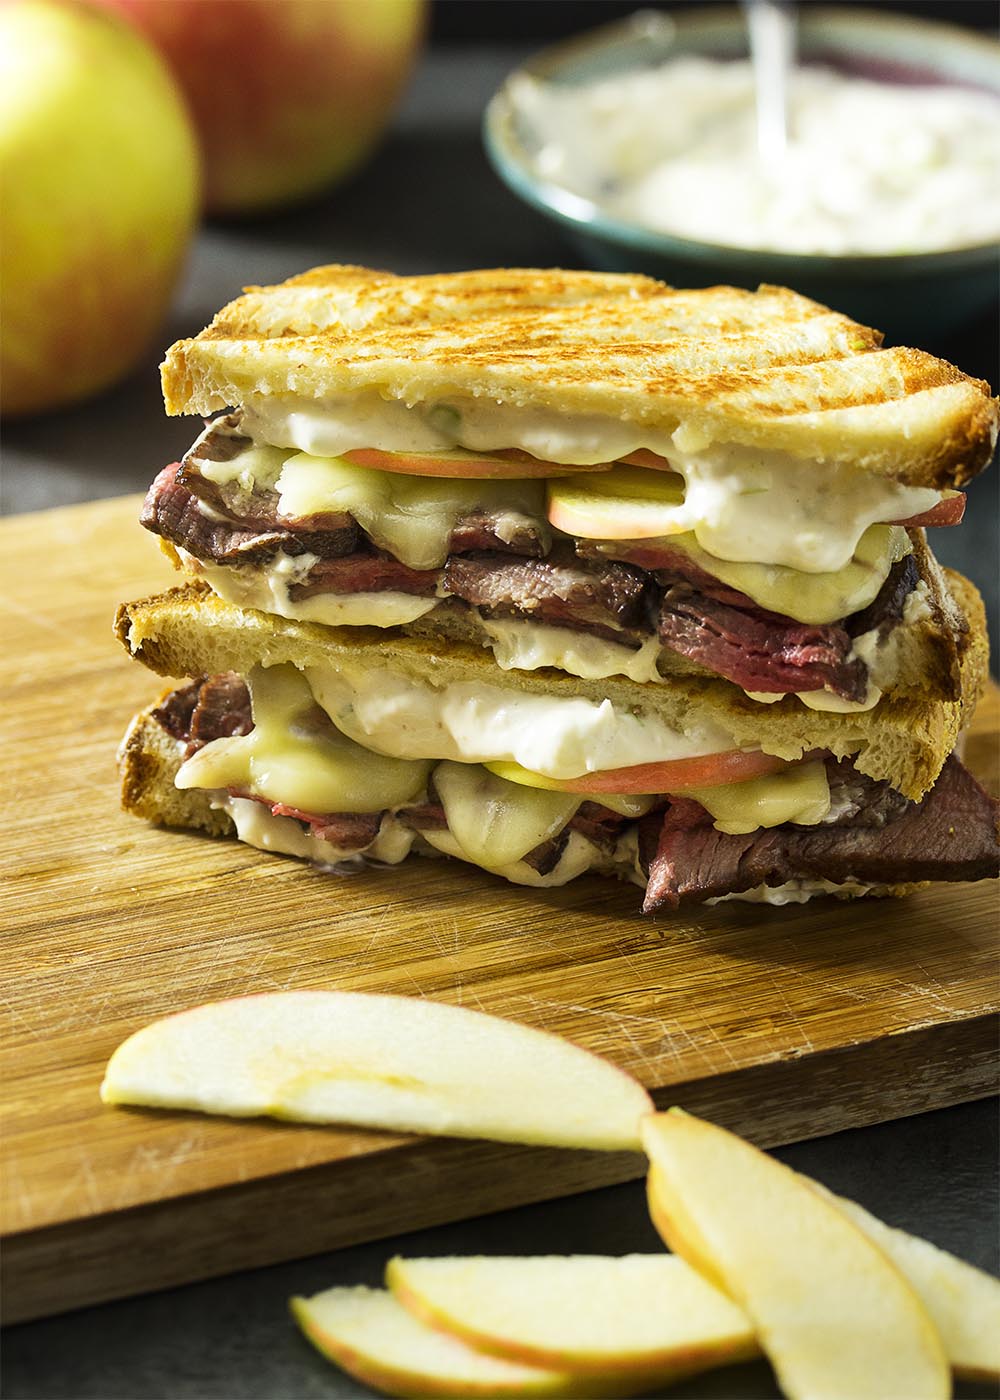 What to do with leftover roast beef? Layer it up on sourdough bread with apples, cheddar, and horseradish sauce for a roast beef panini! Great for lunch or dinner. | justalittlebitofbacon.com